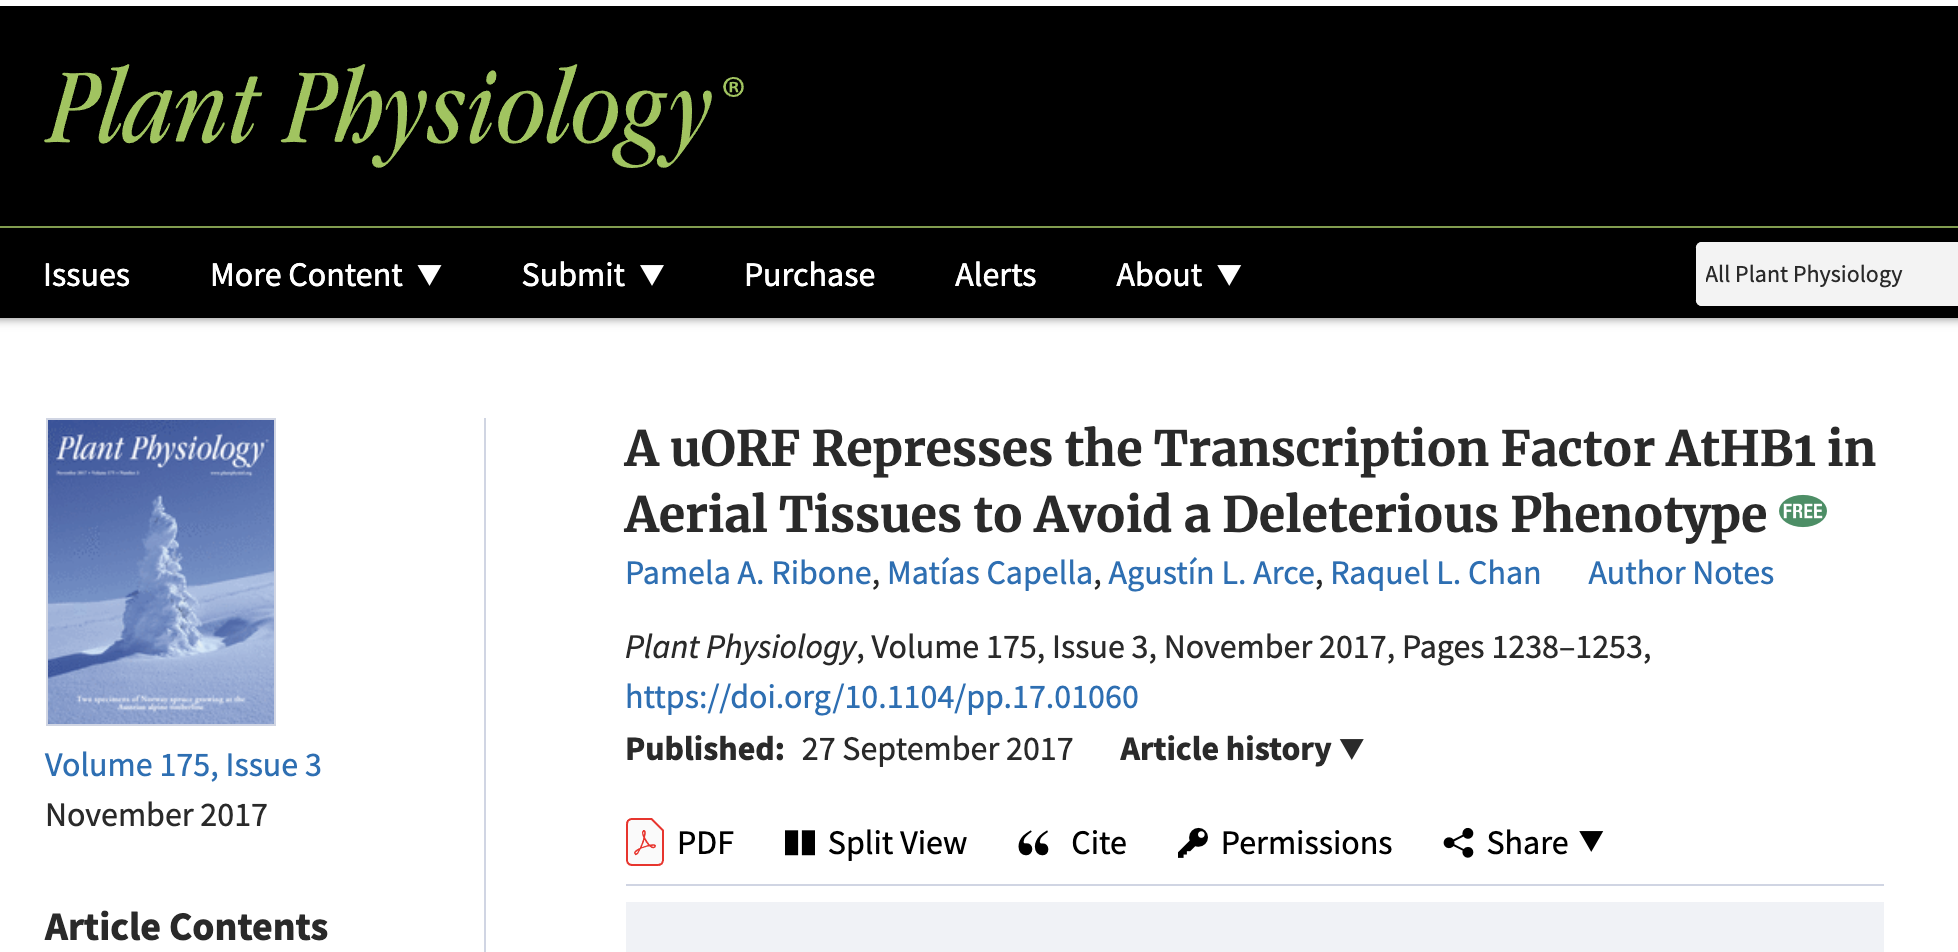 A uORF Represses the Transcription Factor AtHB1 in Aerial Tissues to Avoid a Deleterious Phenotype